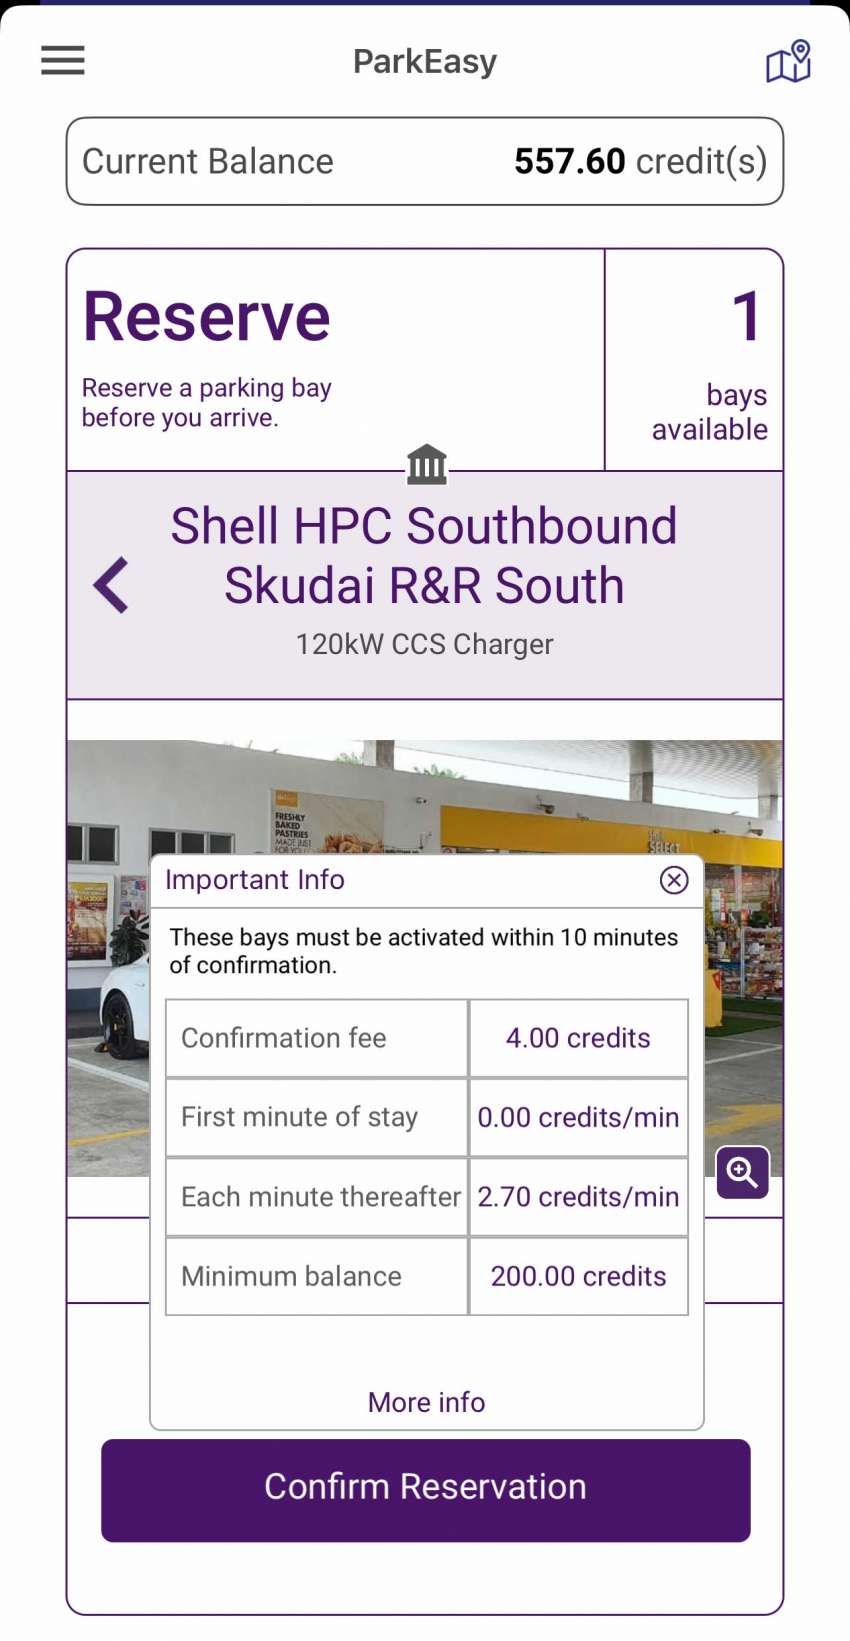 Shell Recharge Skudai R&R south-bound DC charger – 120 kW CCS2, book via ParkEasy, RM2.80/min 1548893